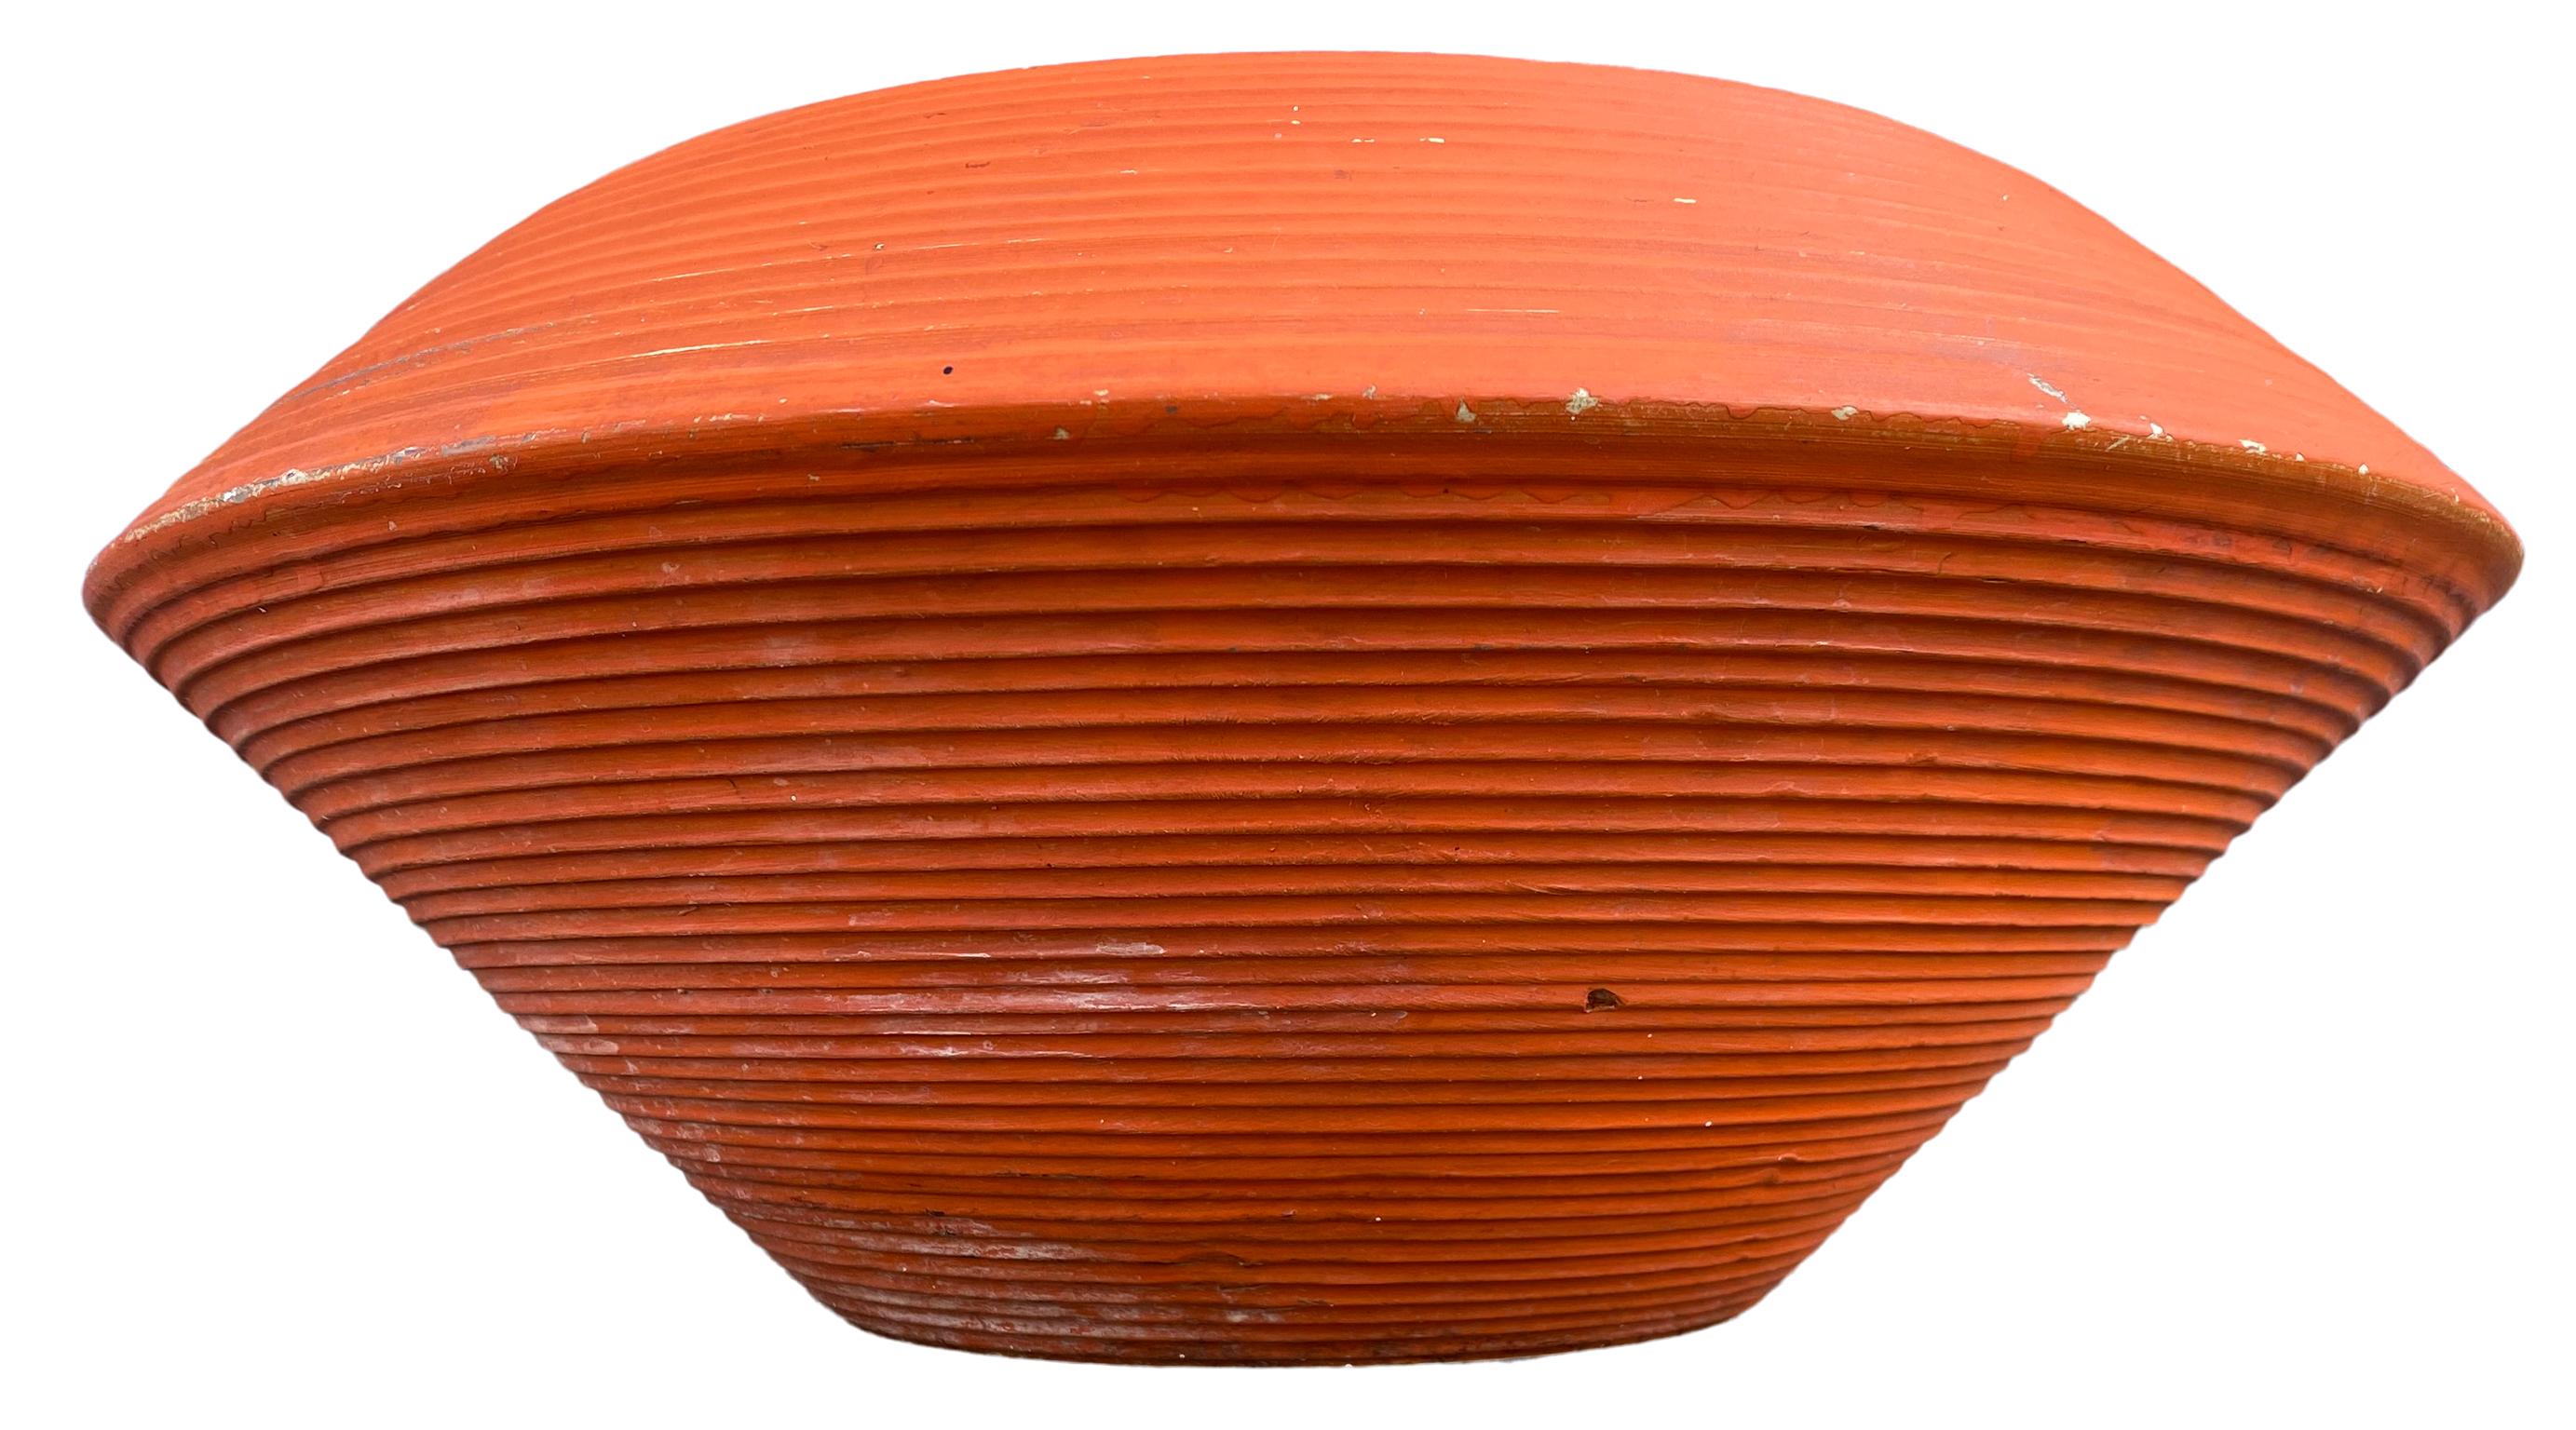 Iconic American Mid-Century Modern Zanesville architectural pottery planter pot. Zanesville pottery Stoneage modern collection, circa 1960s. Simple architectural UFO shape is given great visual interest with incised surface treatment and rich orange